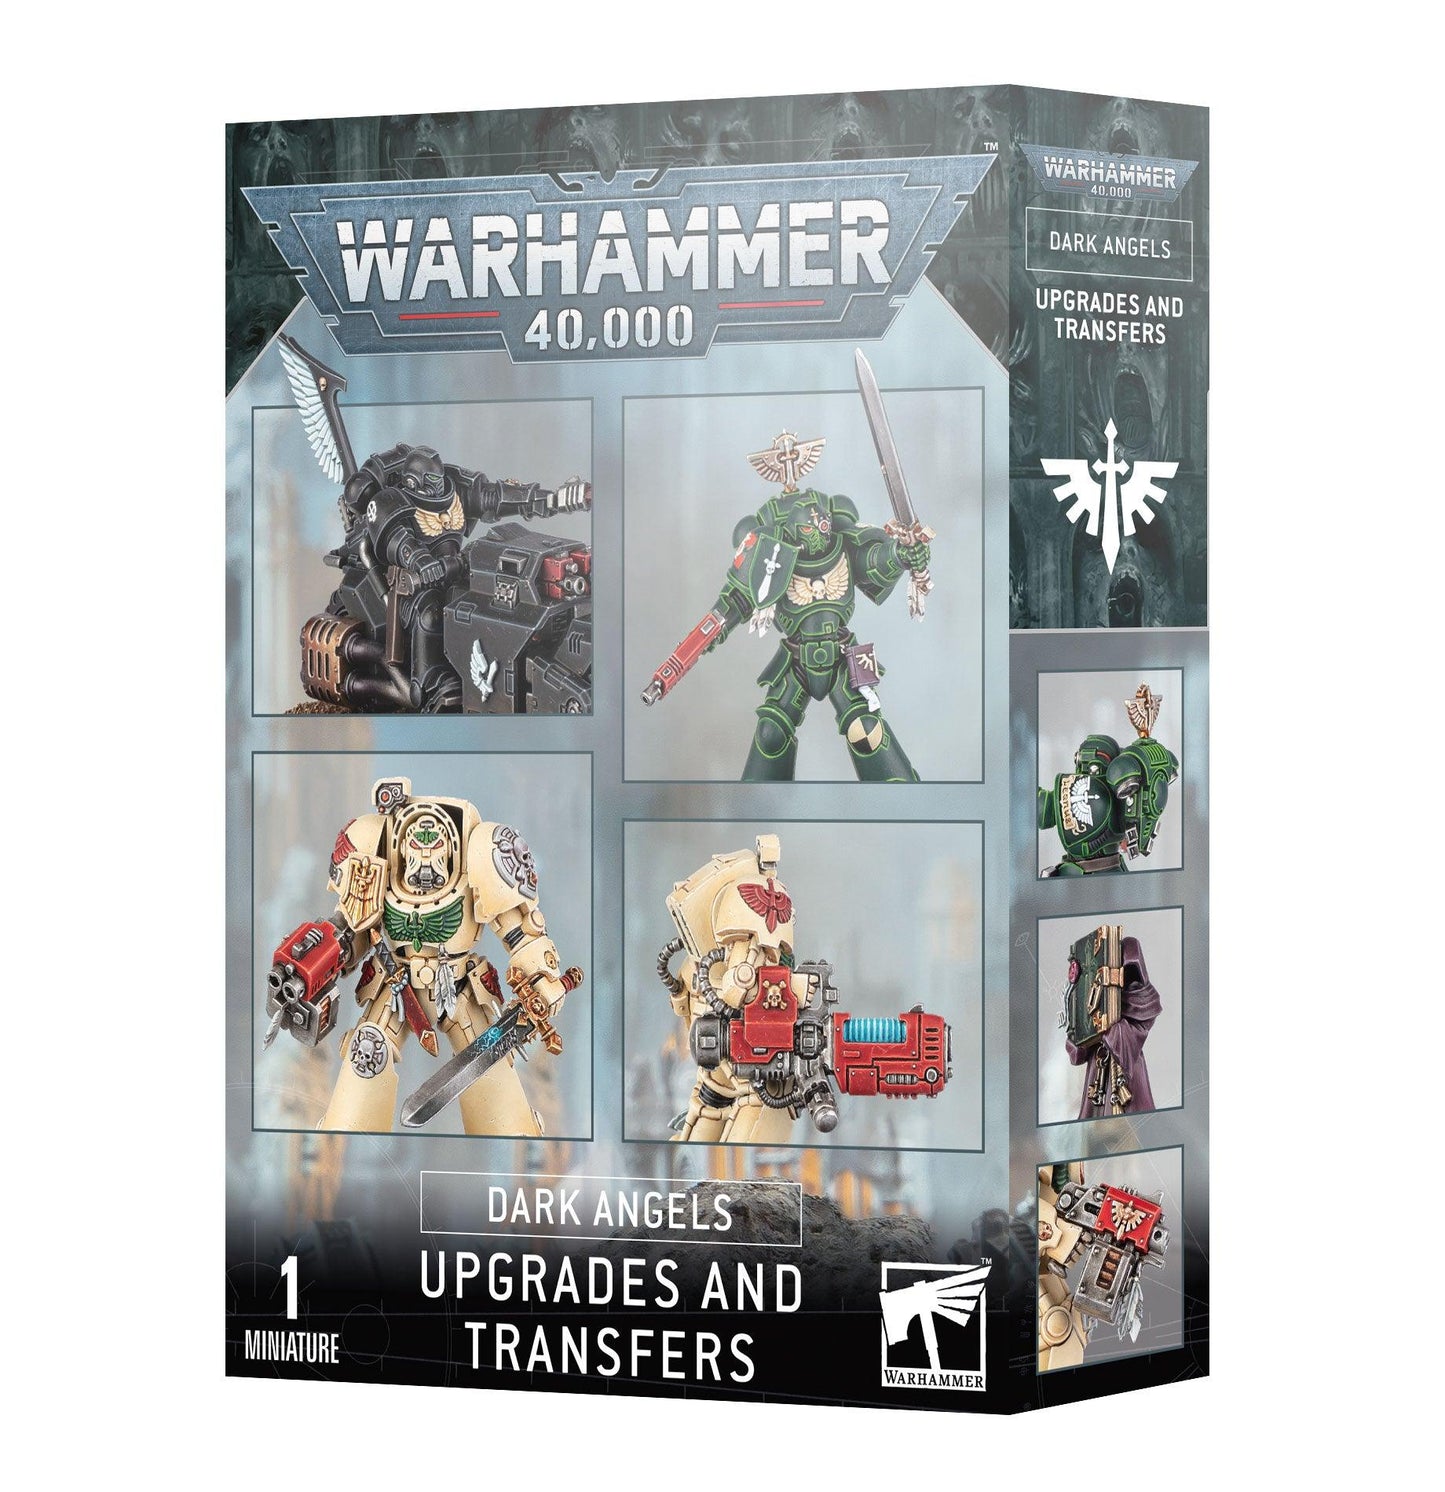 DARK ANGELS UPGRADES AND TRANSFERS - ZZGames.dk